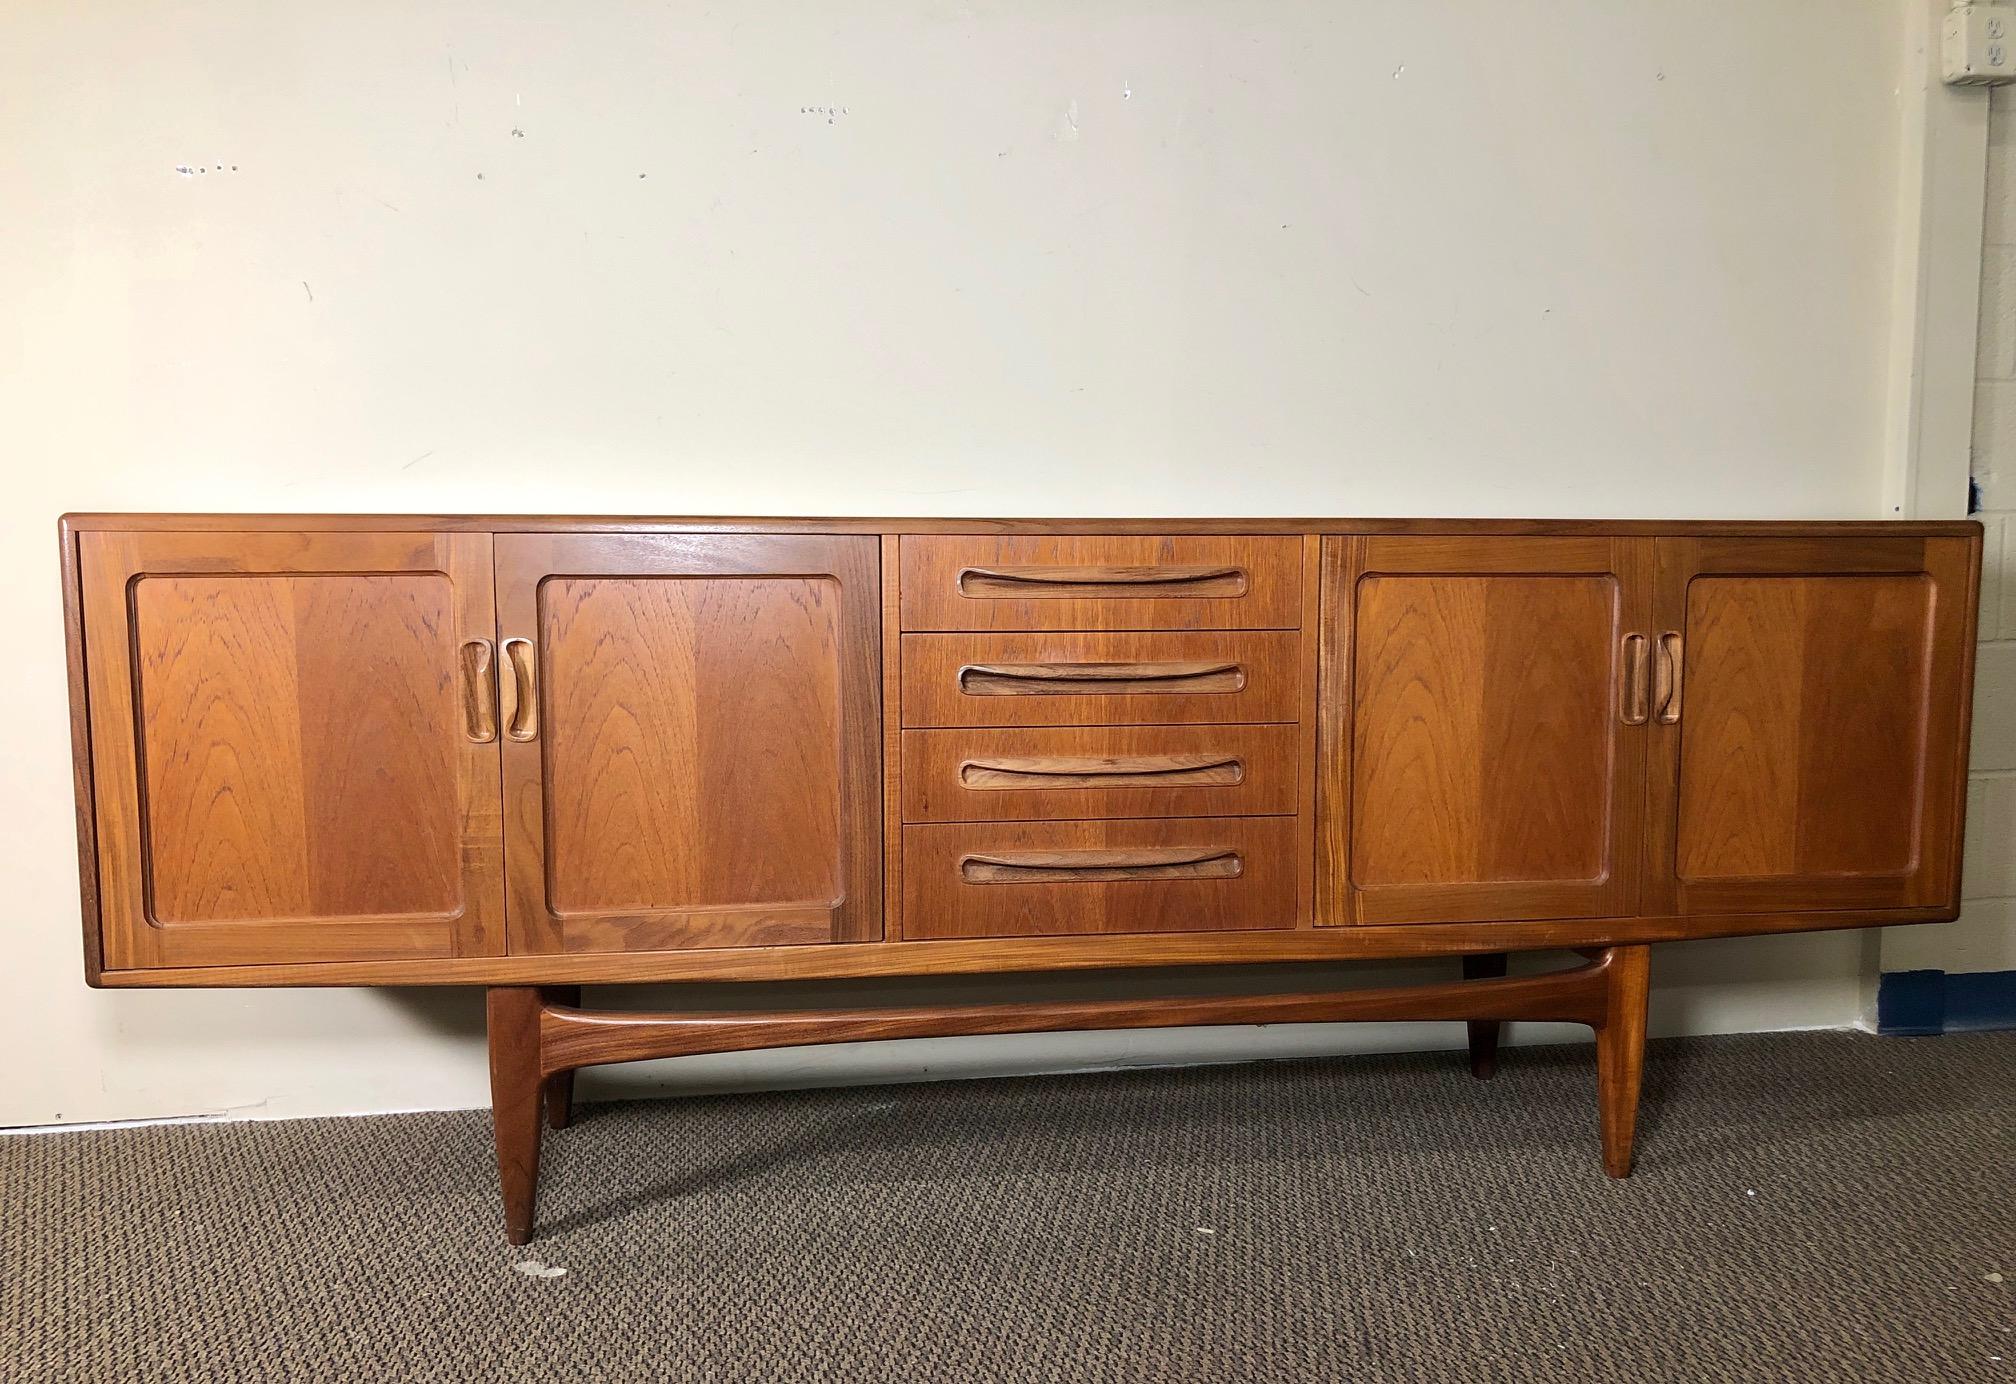 Outstanding teak credenza by G Plan with original gray fabric with silverware dividers in the top drawer.

It is in very good vintage condition. Nice clean interior. Some cup ring marks inside the cabinets, the gray fabric in the top drawer has